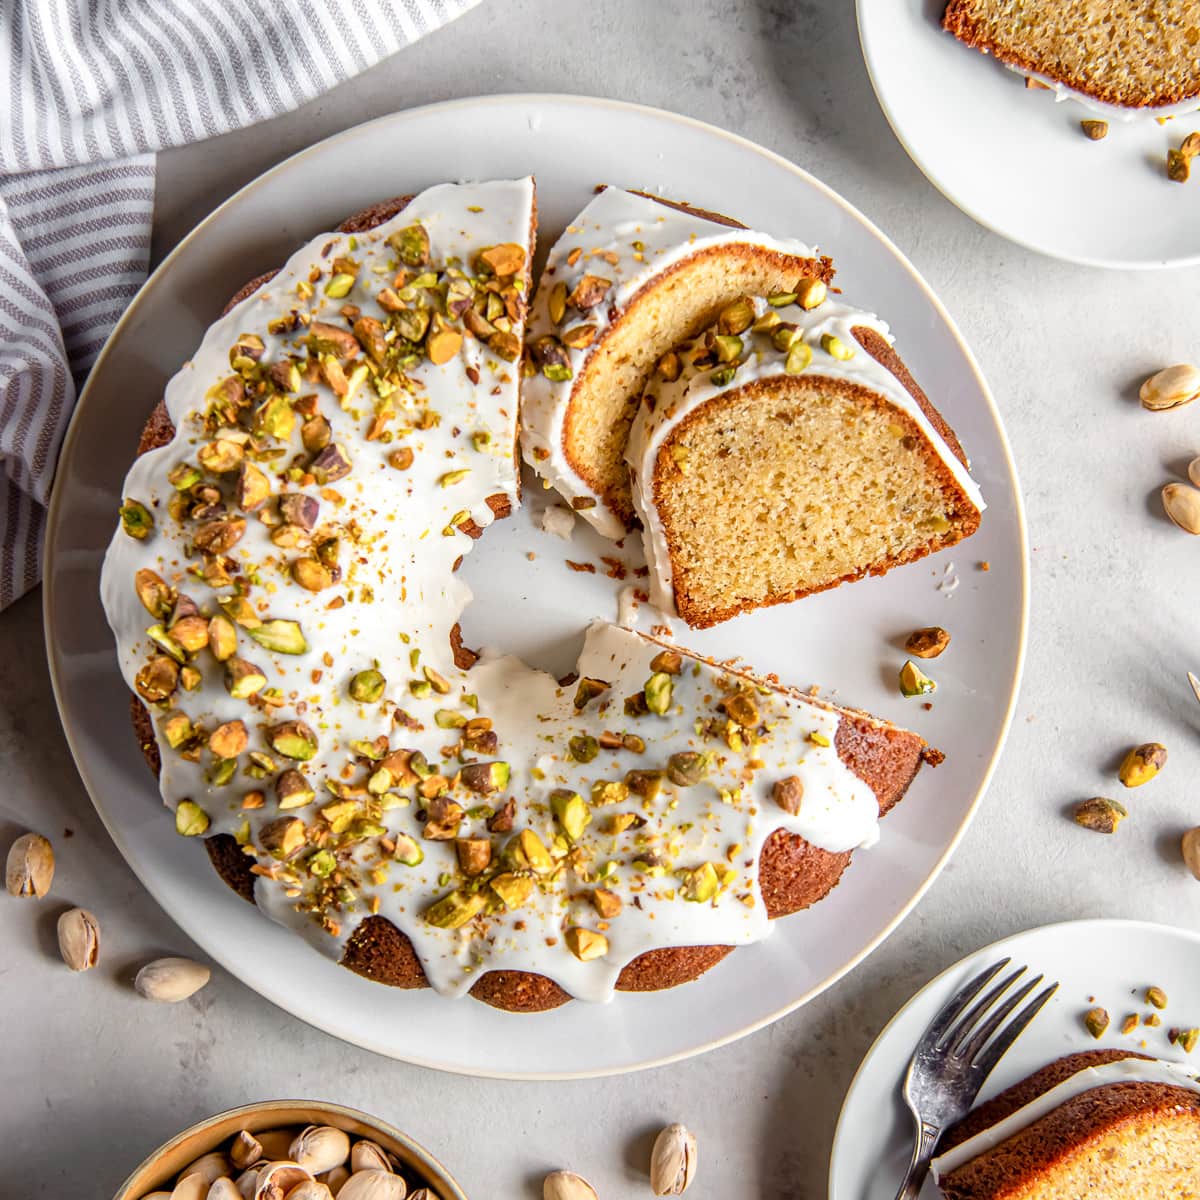 pistachio bundt cake with glaze and chopped pistachios on a plate with two slices cut.